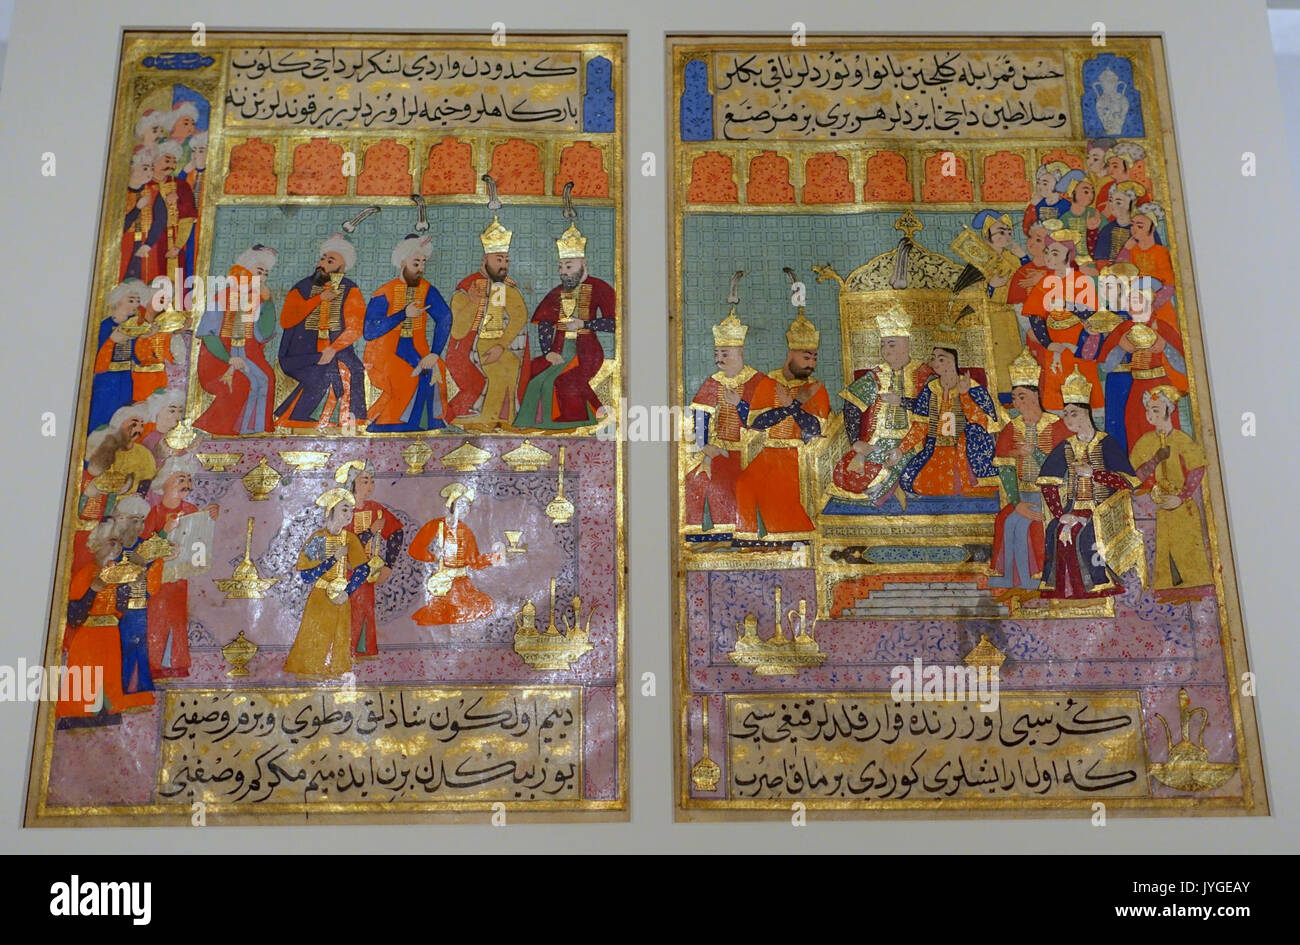 A king and queen enthroned, folio from Tuhfet ul Leta'if (Curious and Witty Gifts) by 'Ali ibn Naqib Hamza, Turkey, 1593 1594 AD, ink, colour, gold on paper   Aga Khan Museum   Toronto, Canada   DSC06759 Stock Photo